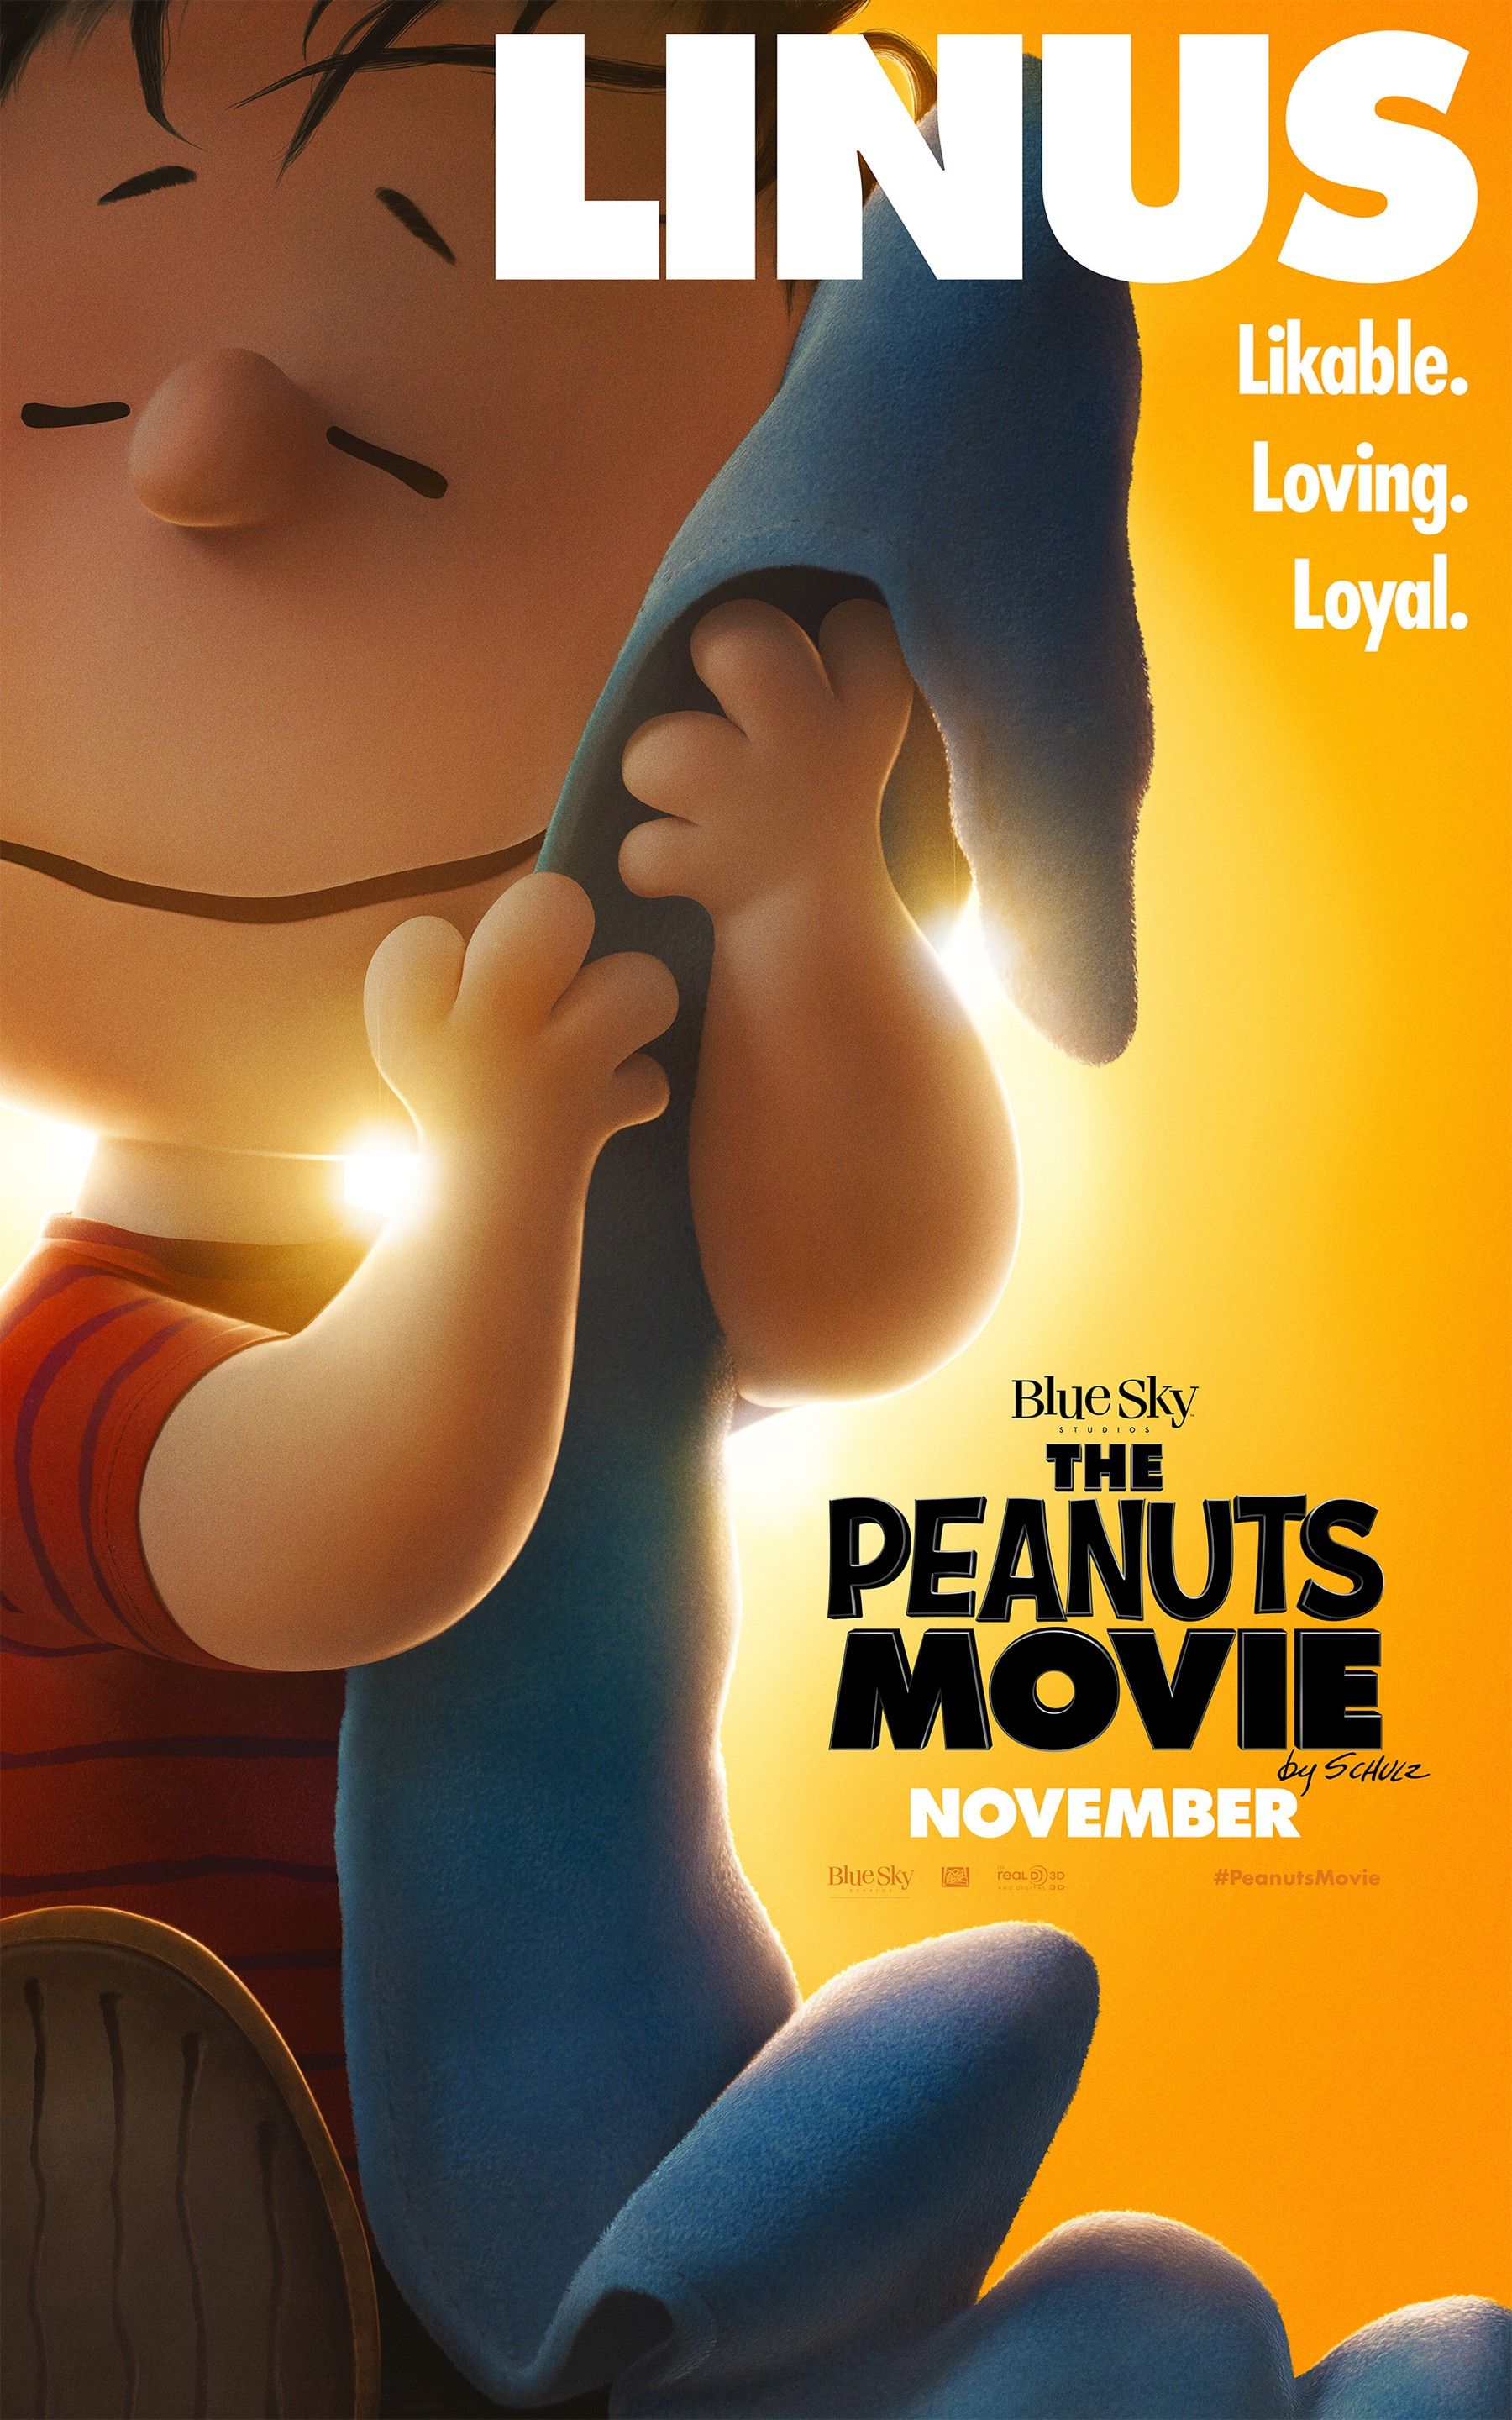 Peanuts Movie Linus Character Poster